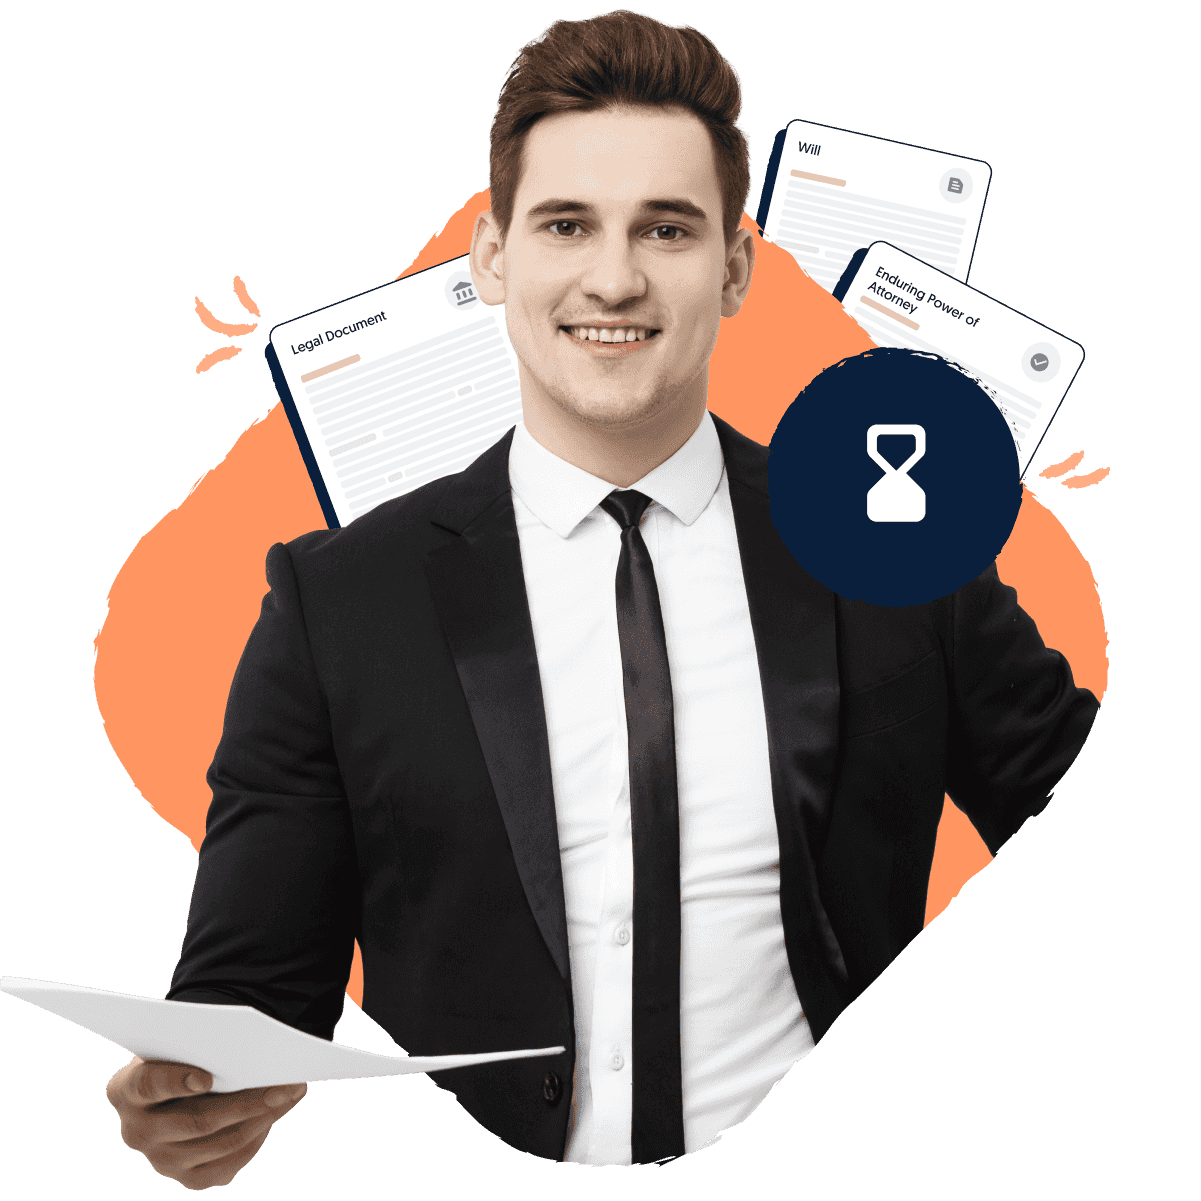 Will And Estate Lawyers Brisbane